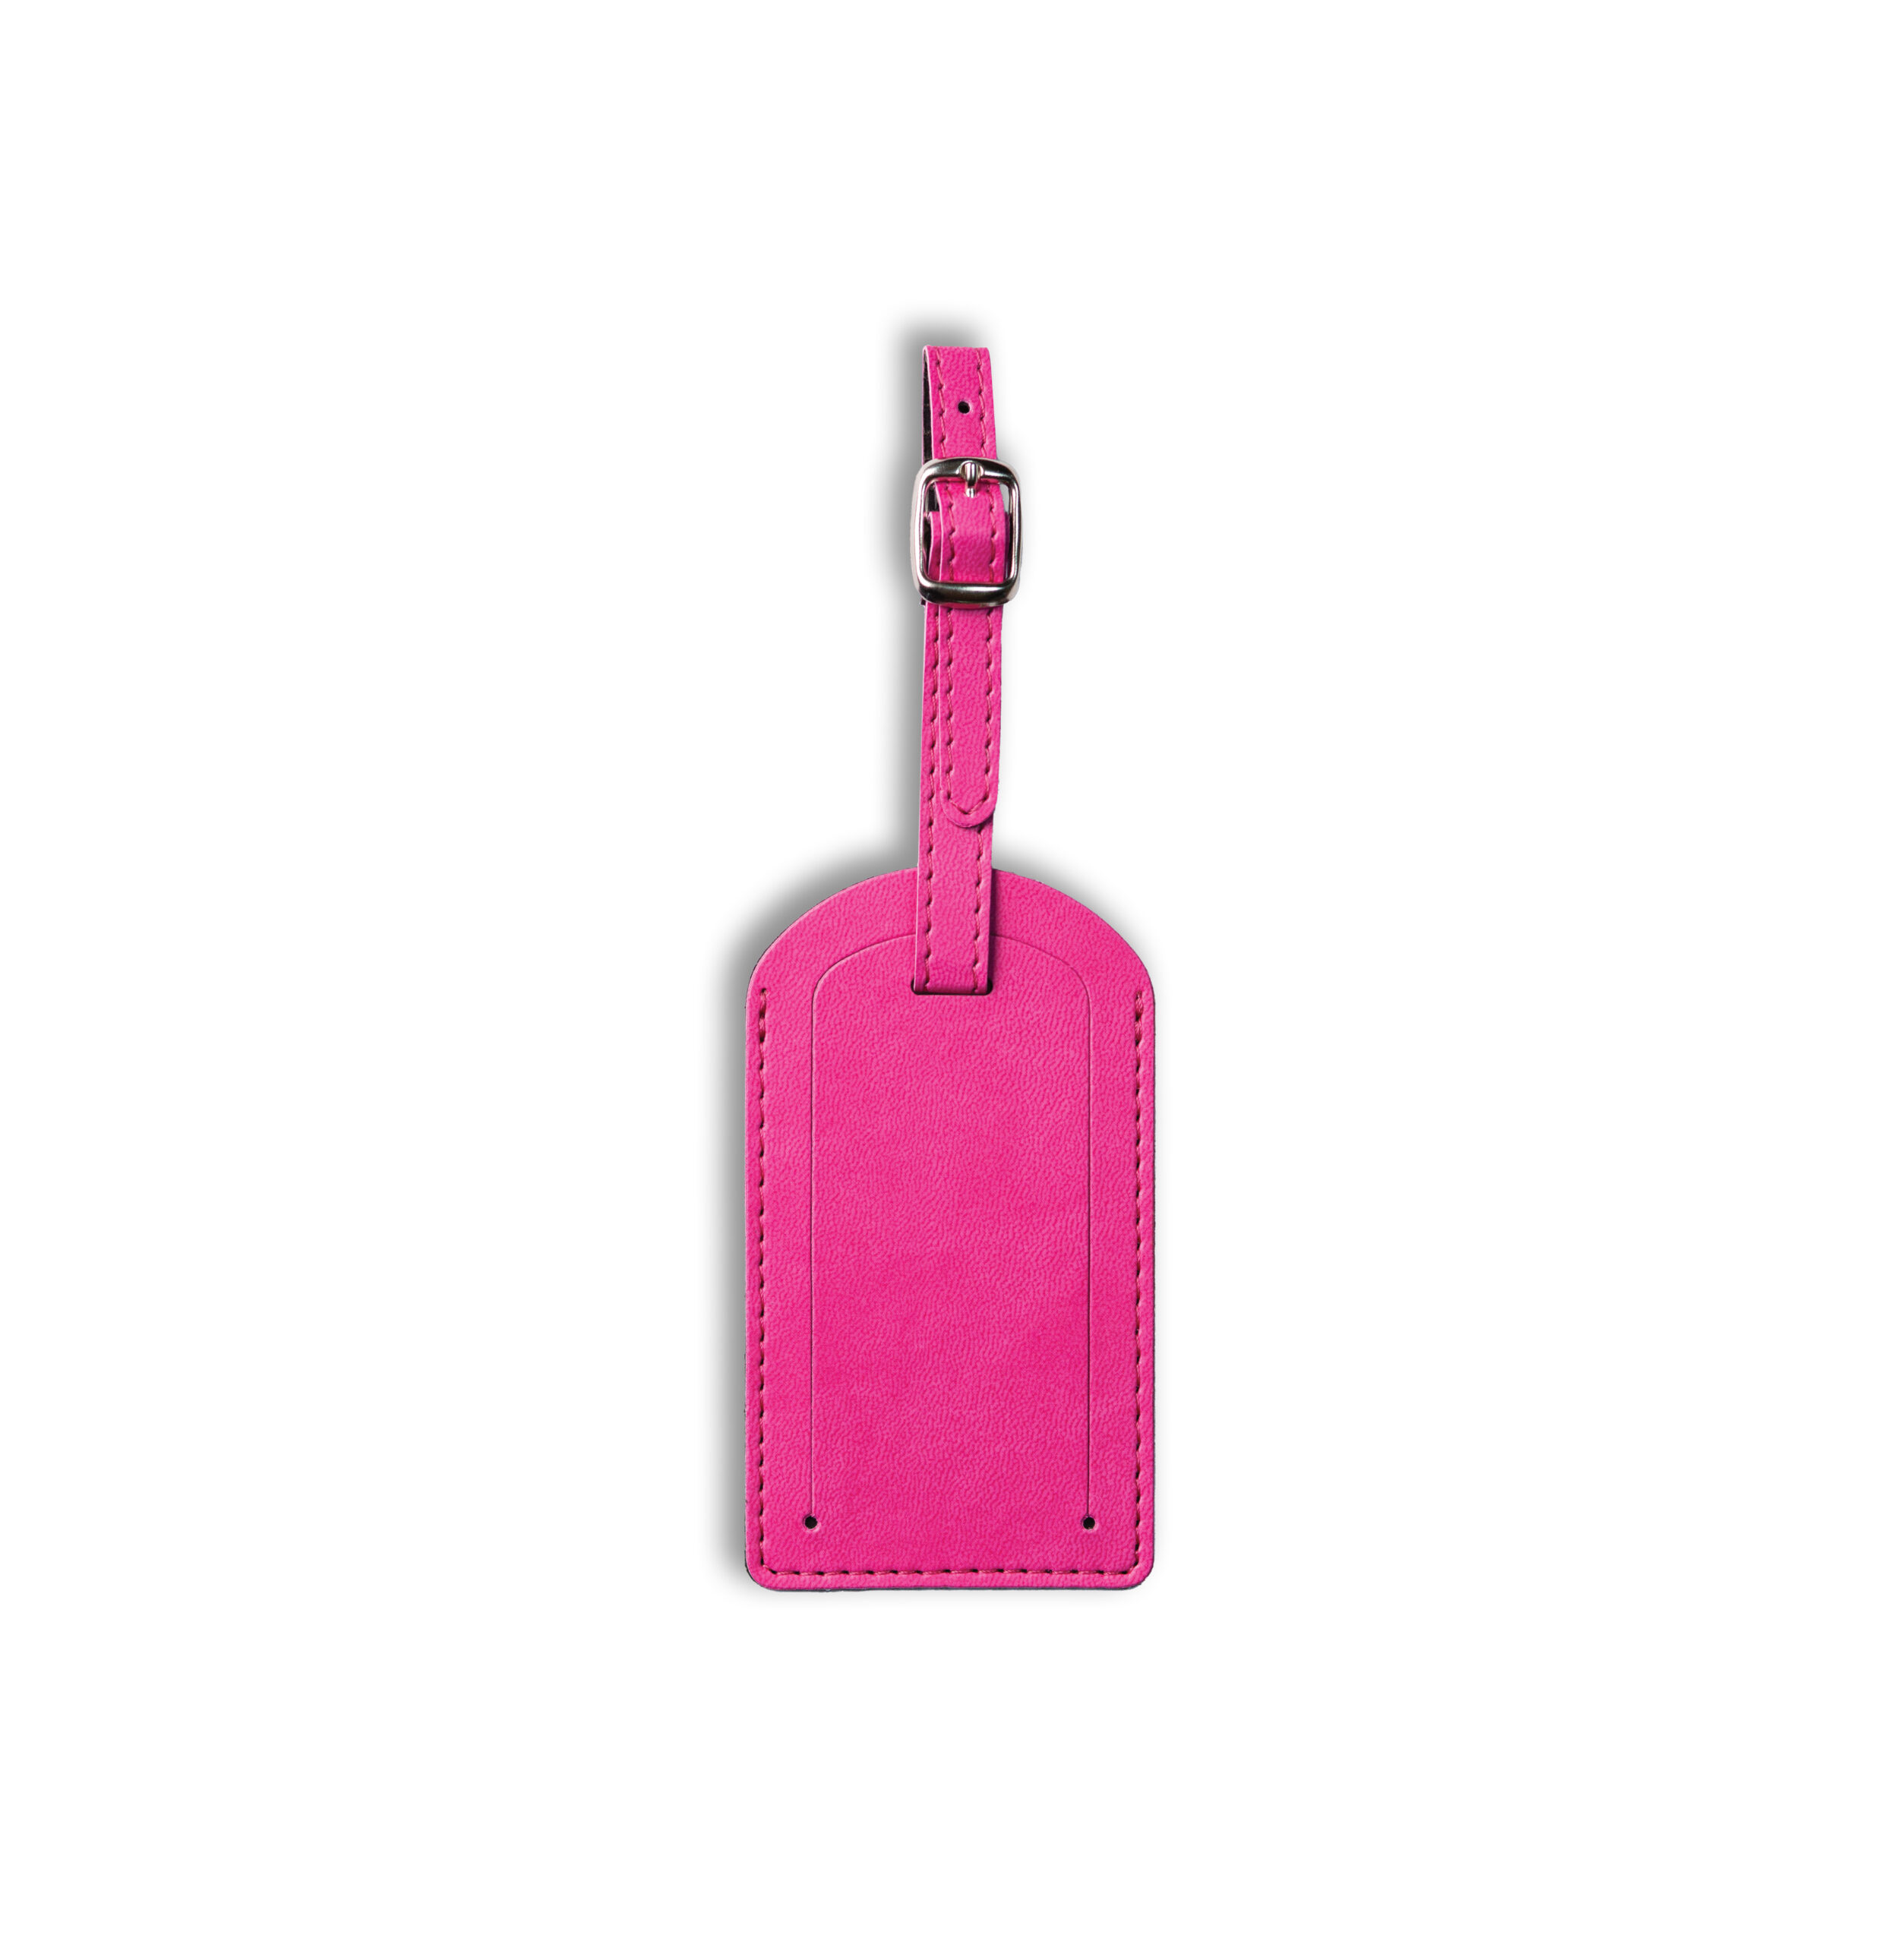 NewHide Luggage Tag Standard Size - Abbeygate Manufacturing